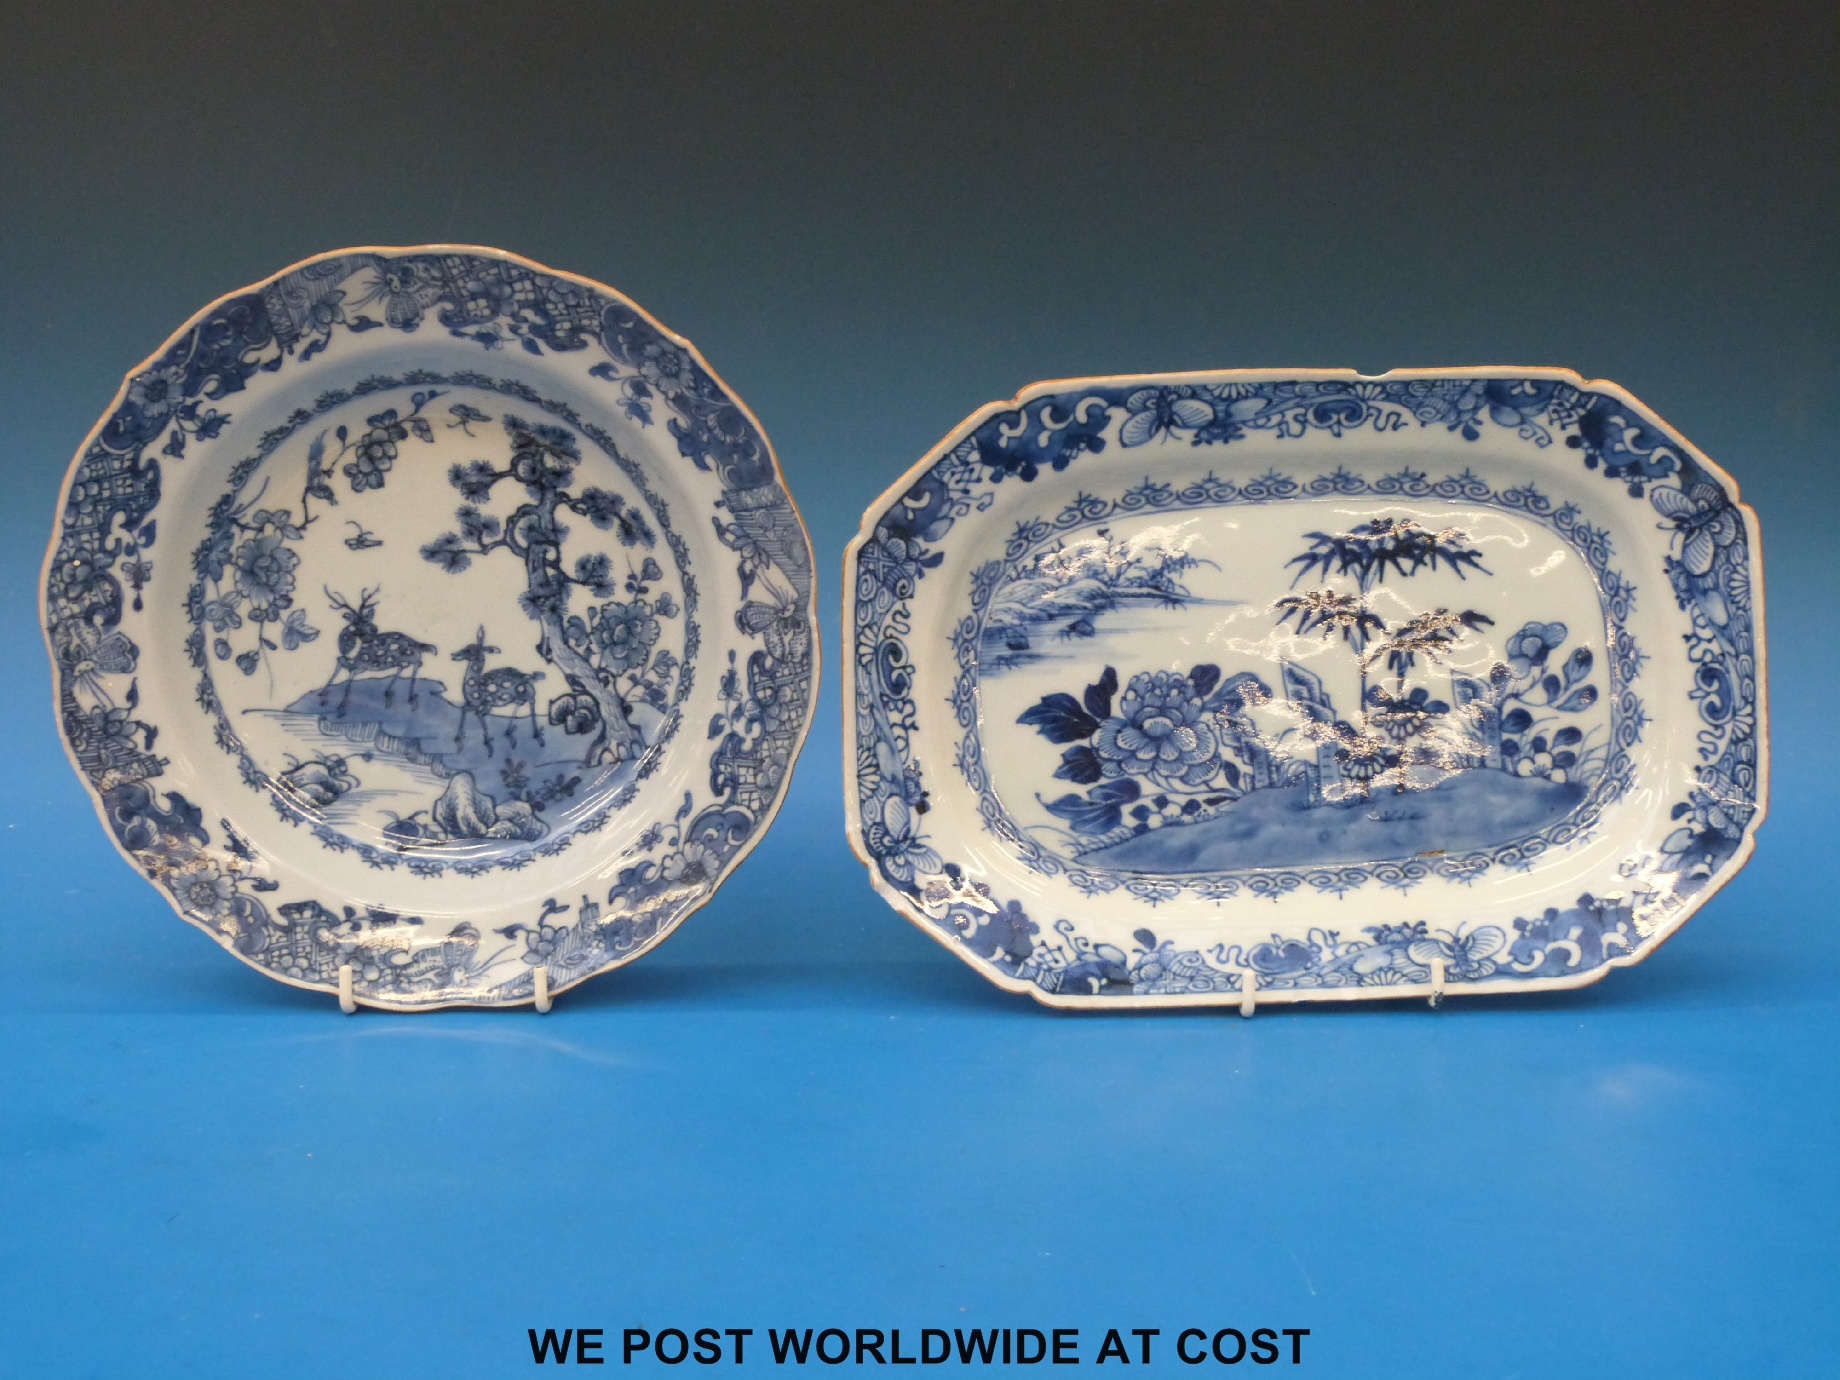 An 18th century Chinese export plate together with a platter